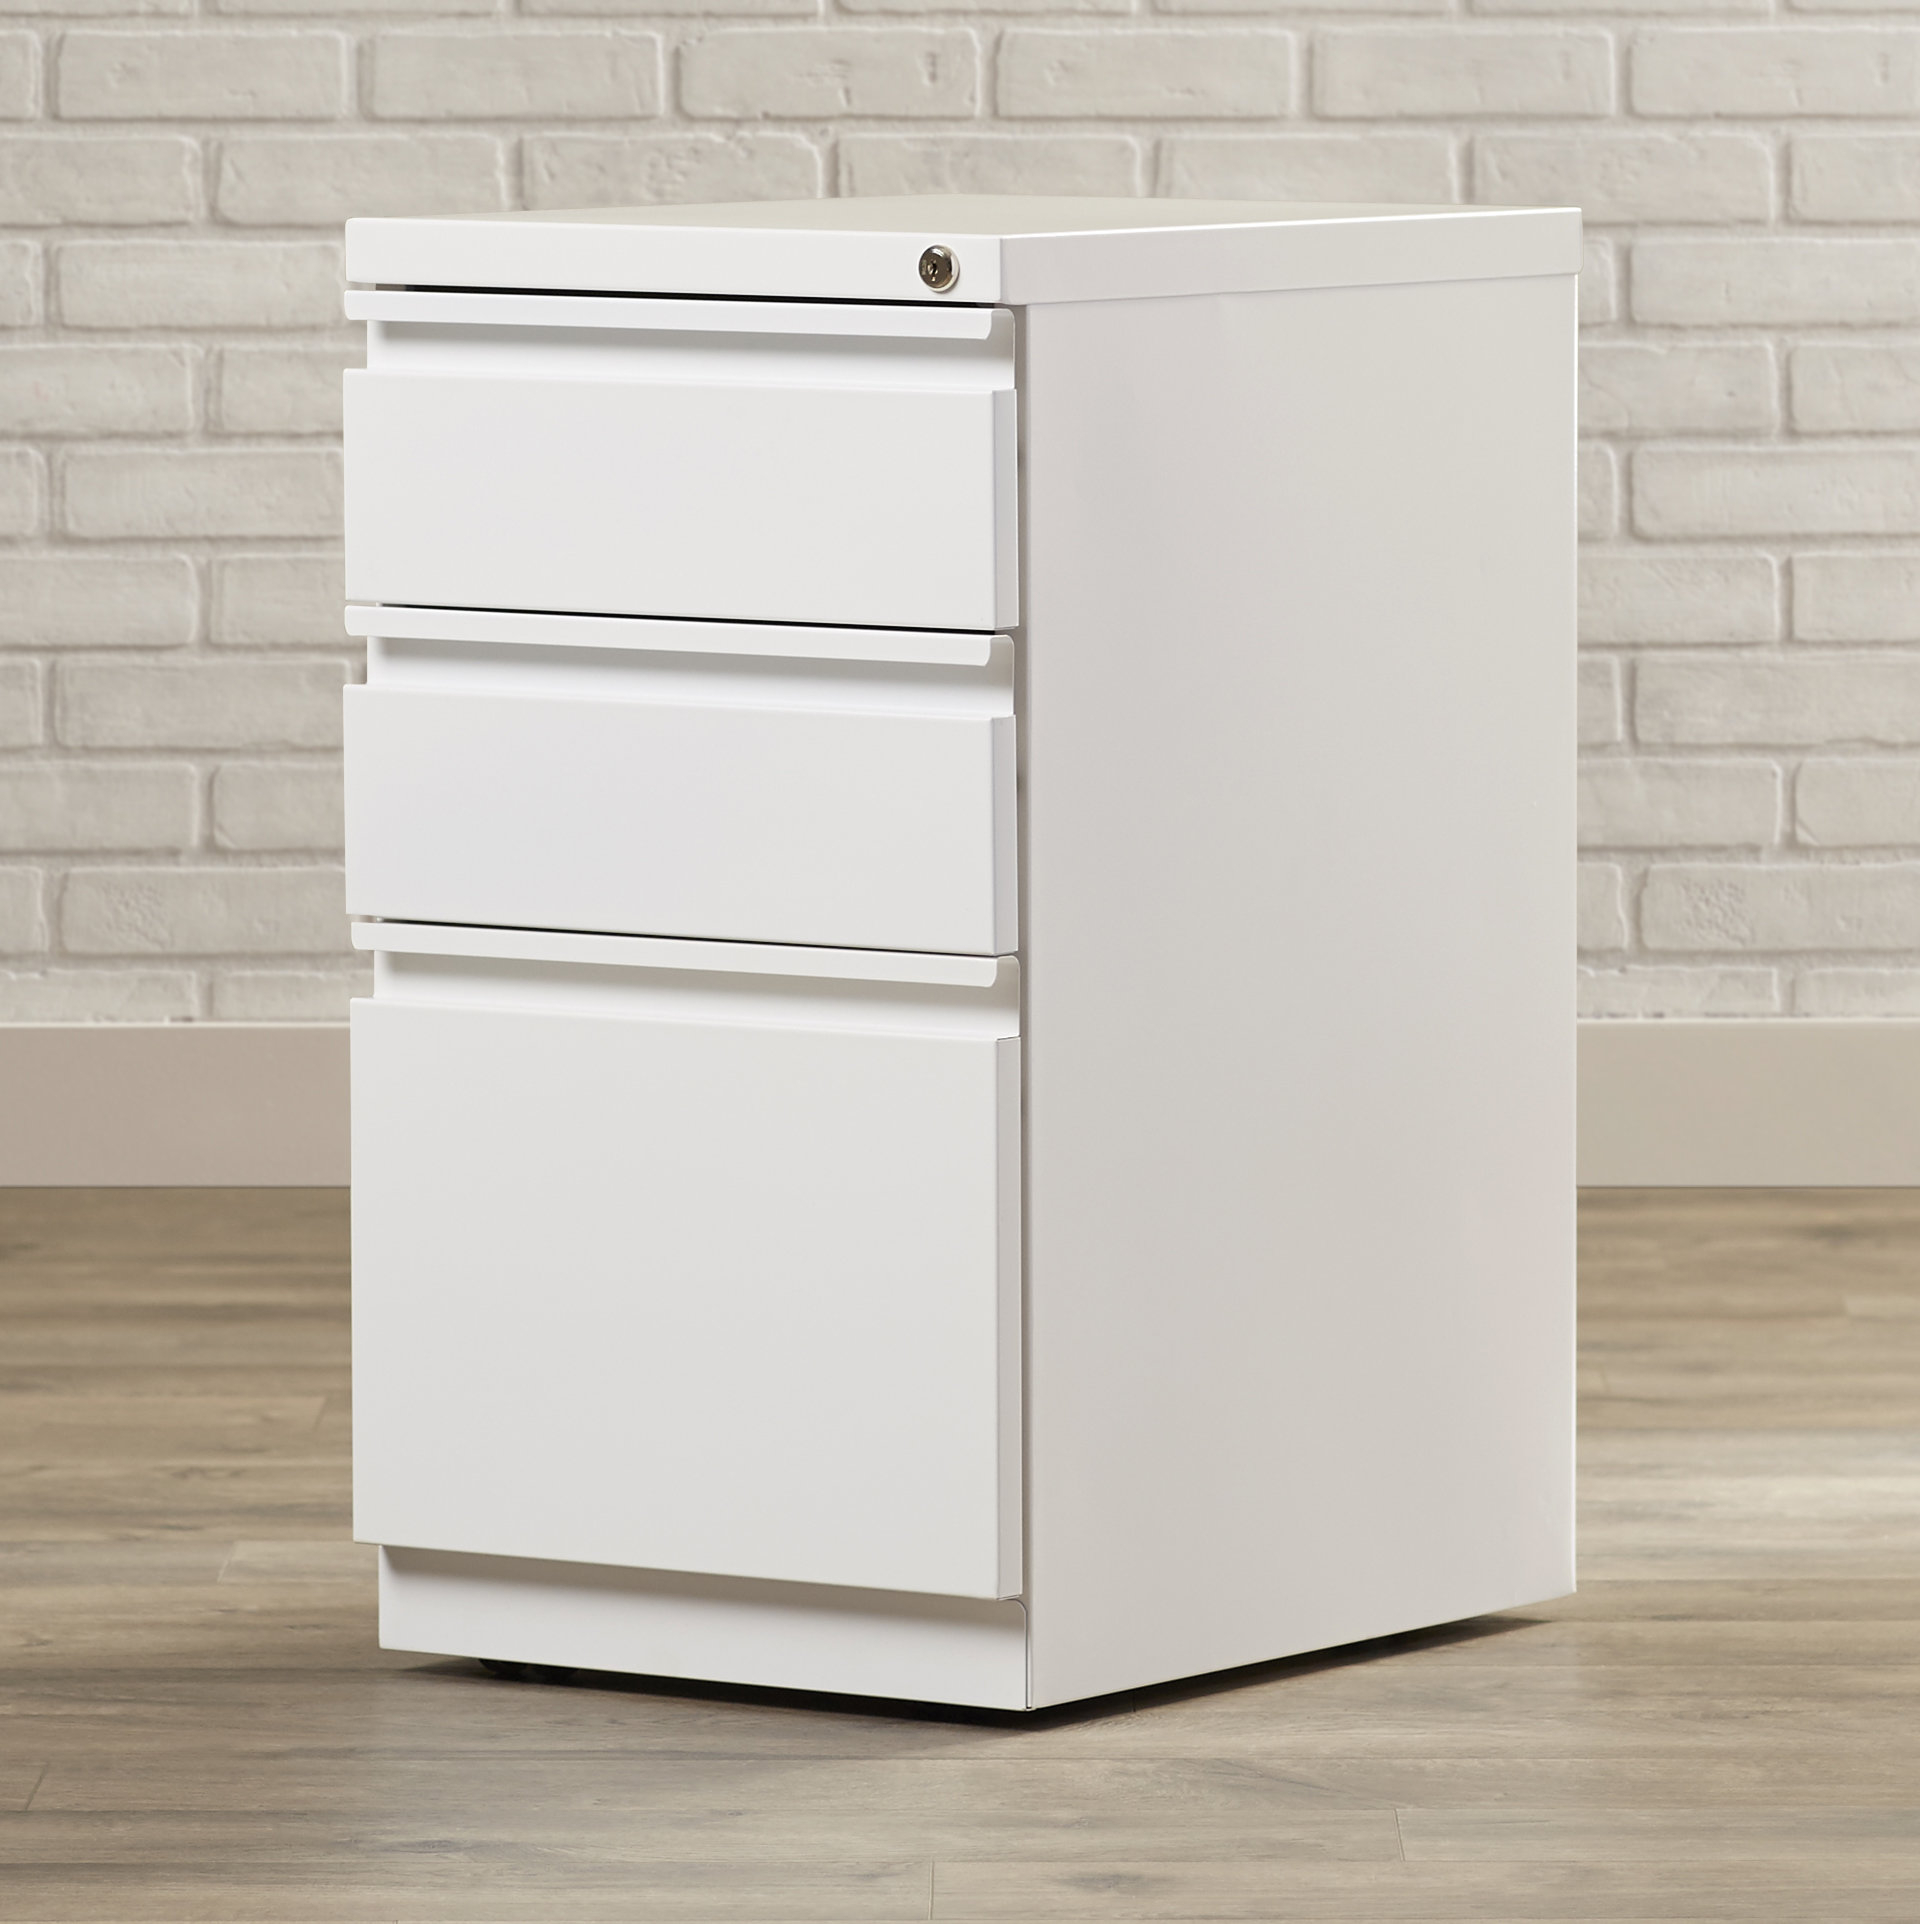 Comm Office Premo 3 Drawer Vertical Filing Cabinet Reviews Wayfair intended for size 1920 X 1924